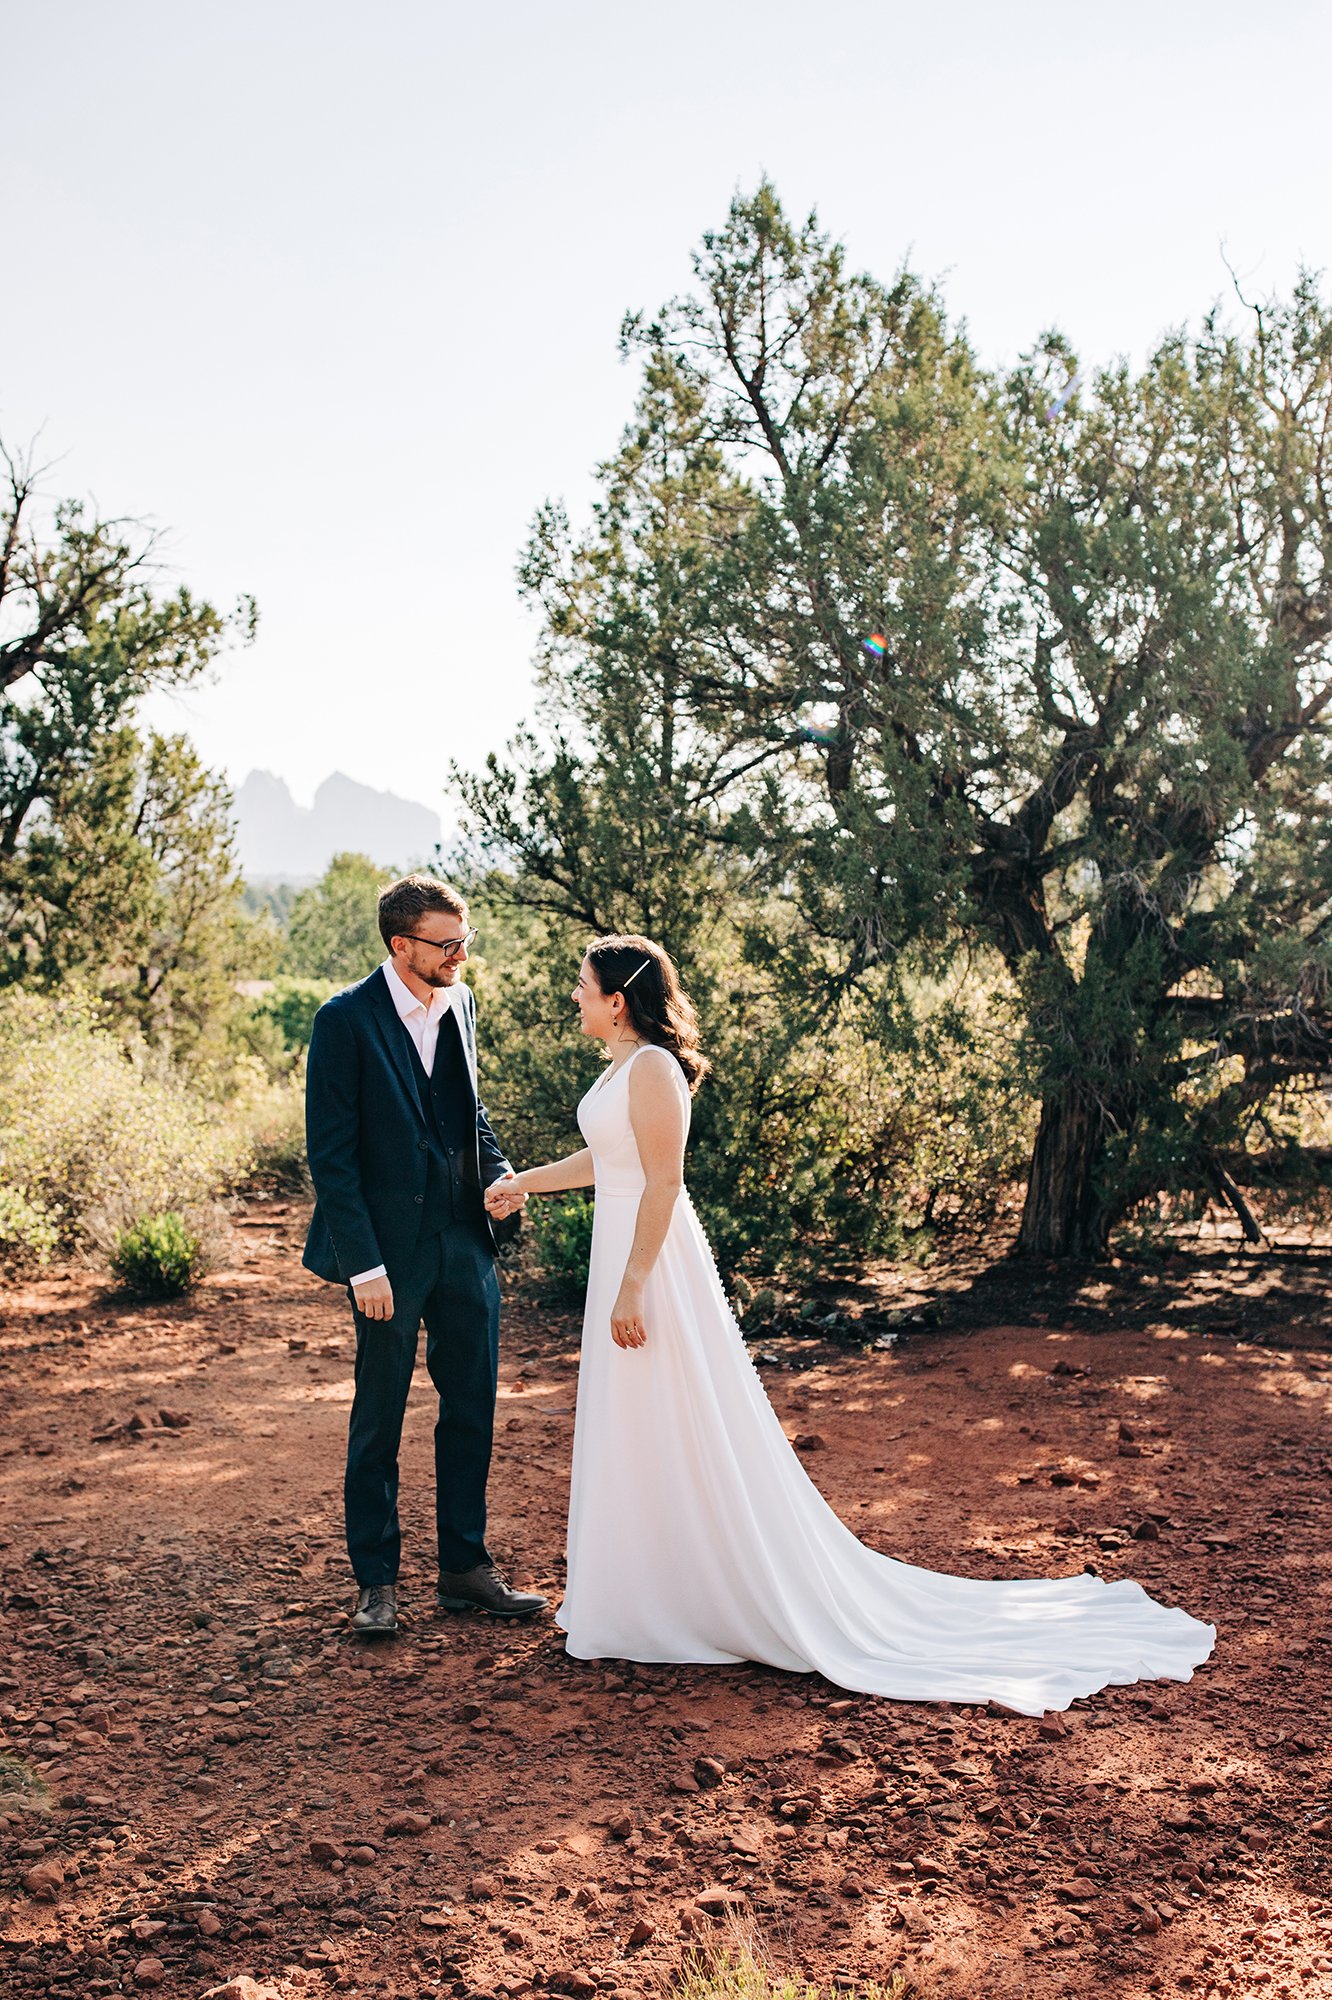 Stephanie and Matthew share a first look moment amongst trees and red rocks. 